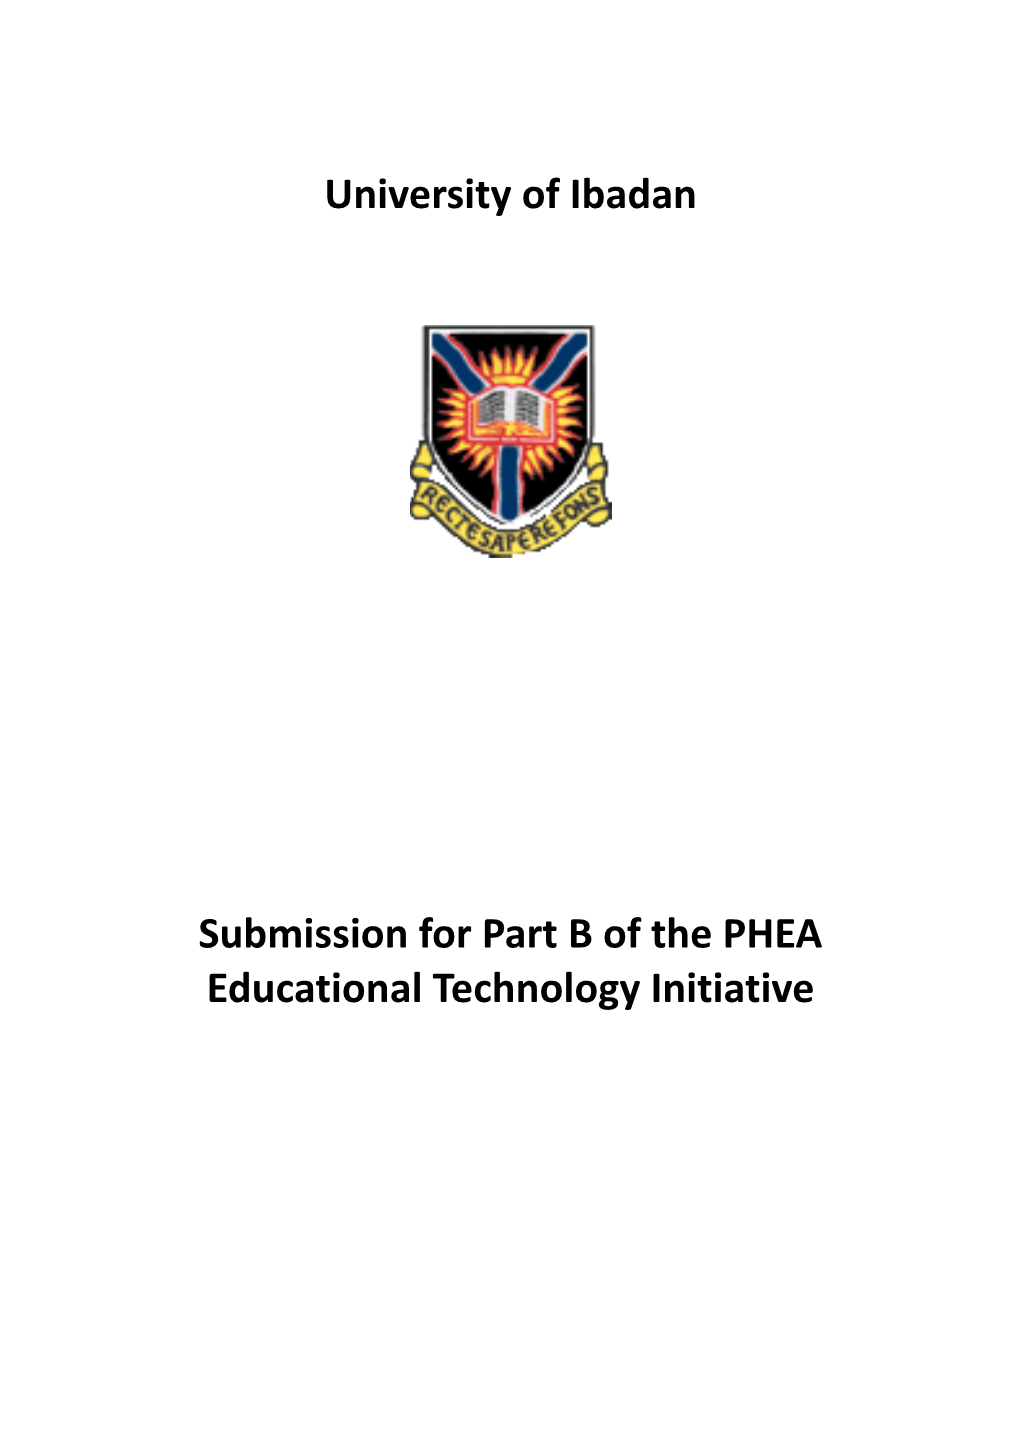 Submission for Part B of the PHEA Educational Technology Initiative